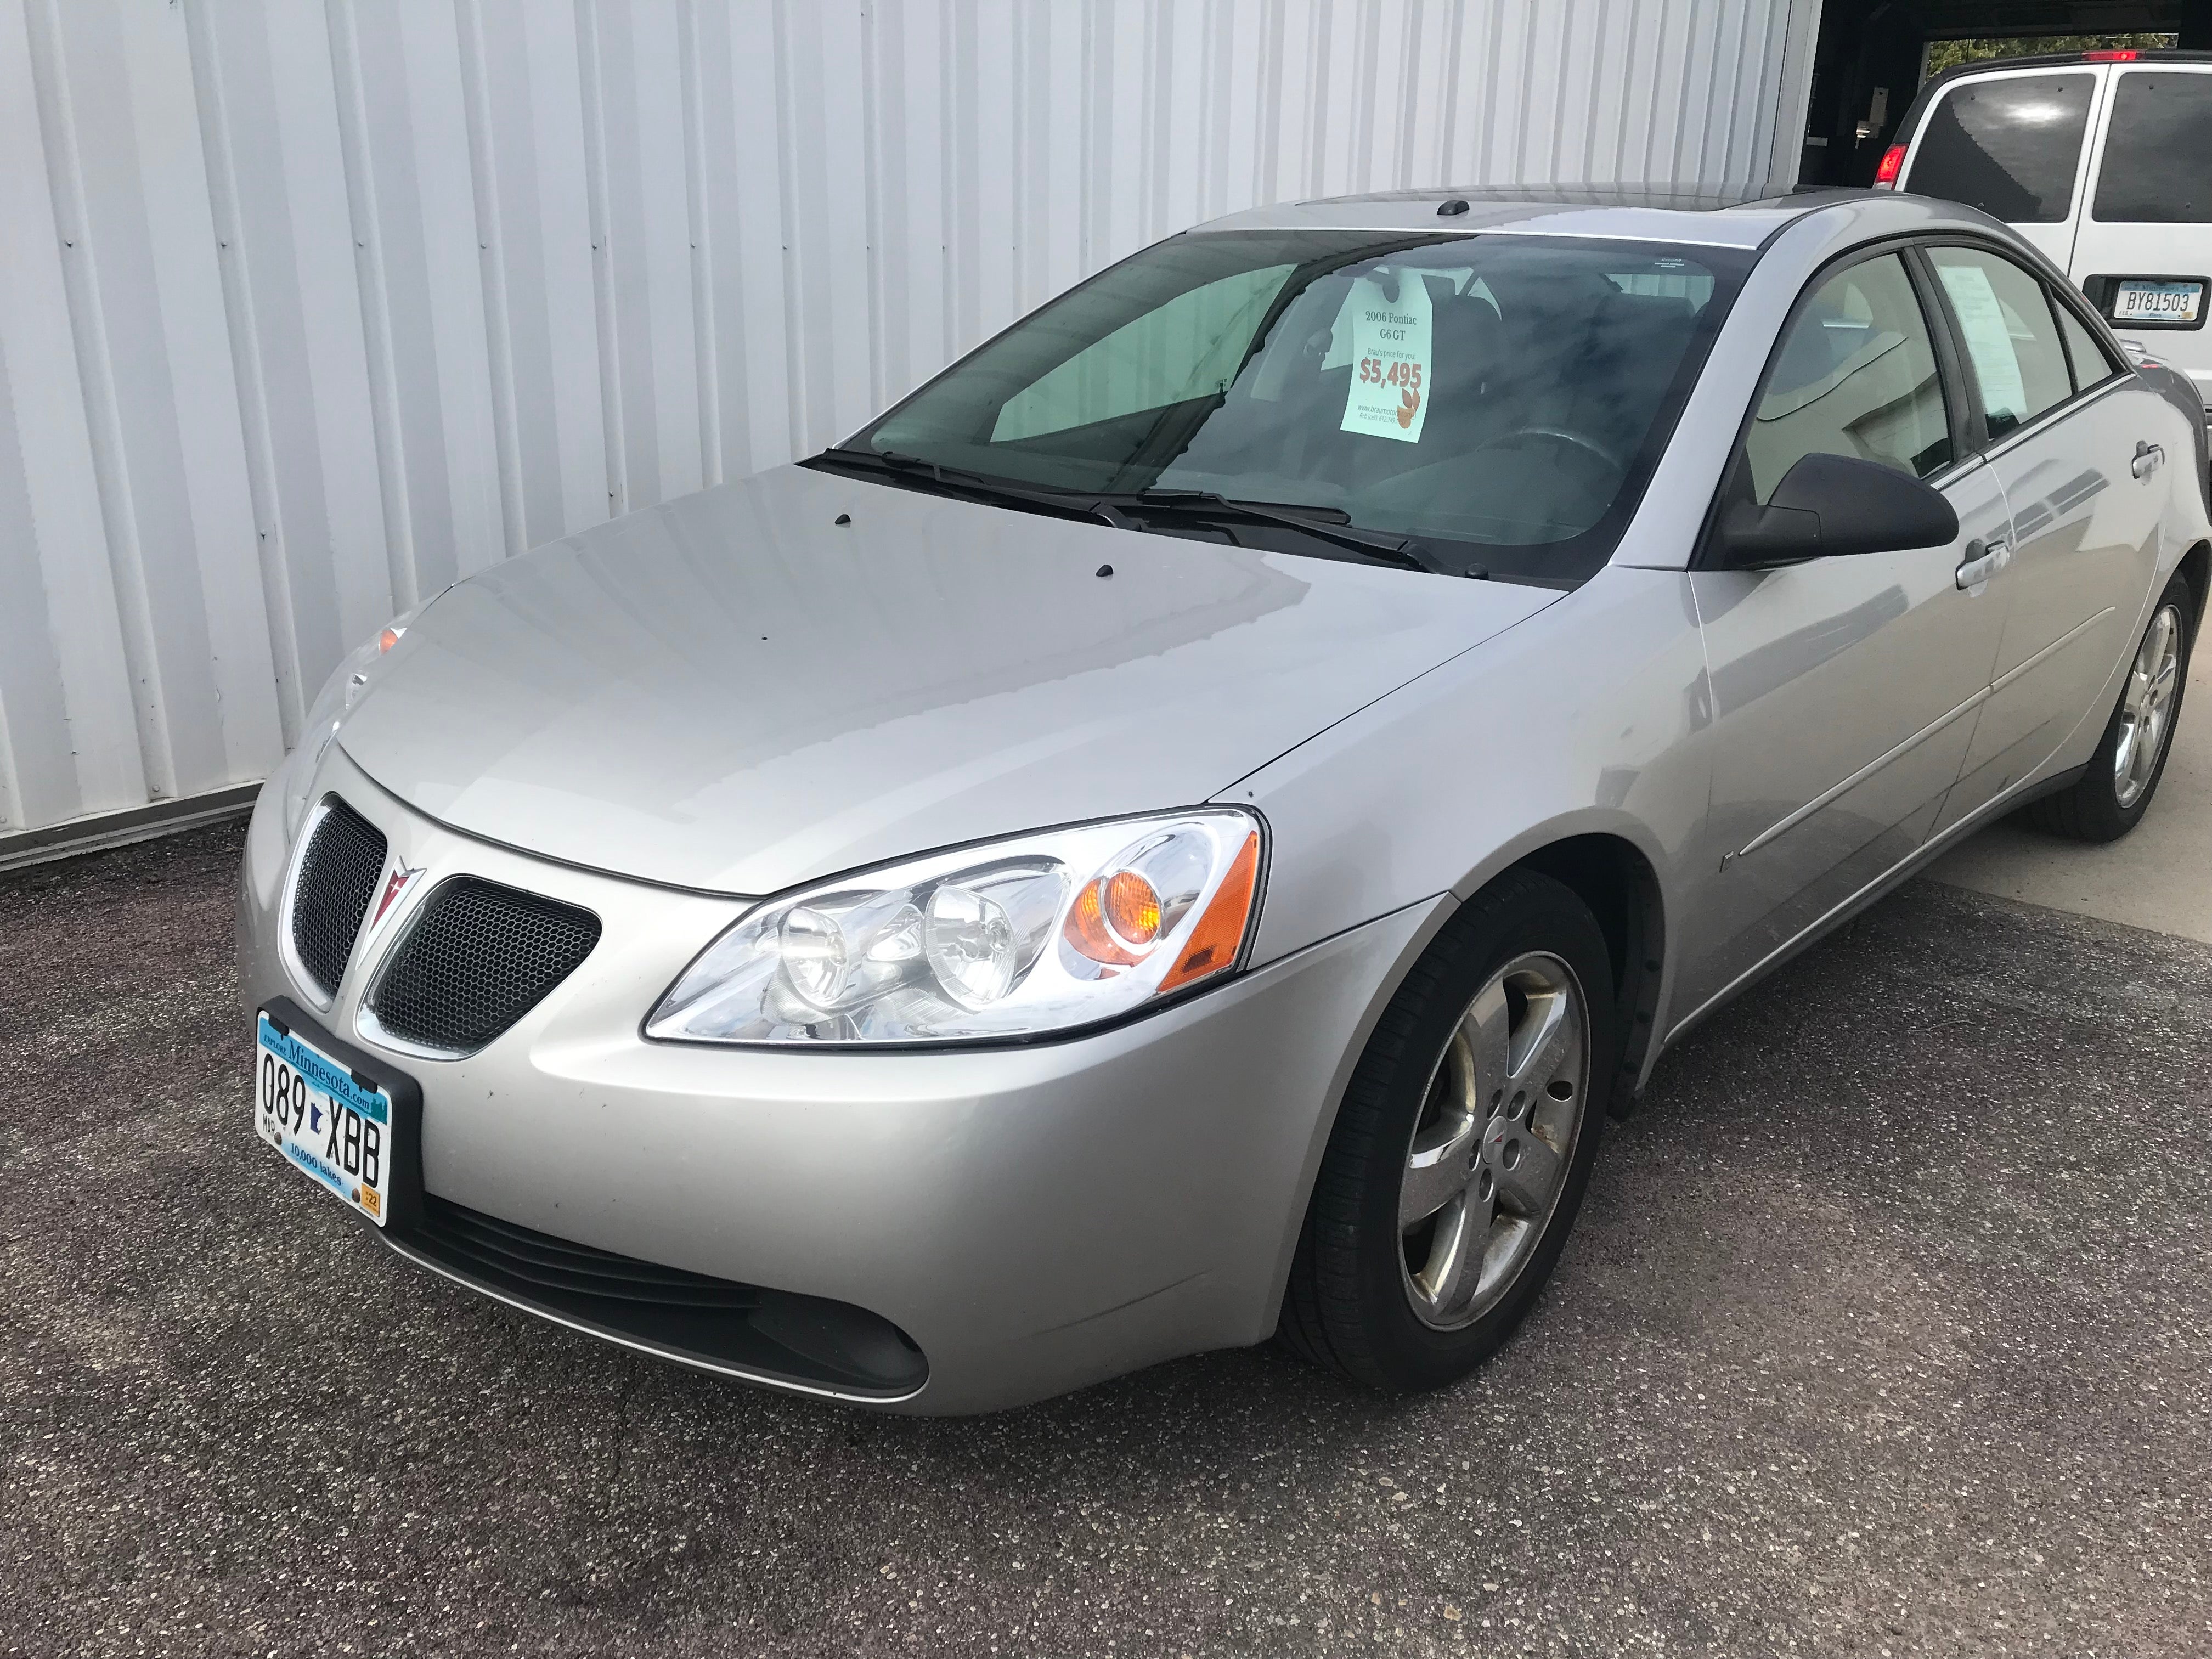 Used 2006 Pontiac G6 GT with VIN 1G2ZH578164244643 for sale in Arlington, Minnesota